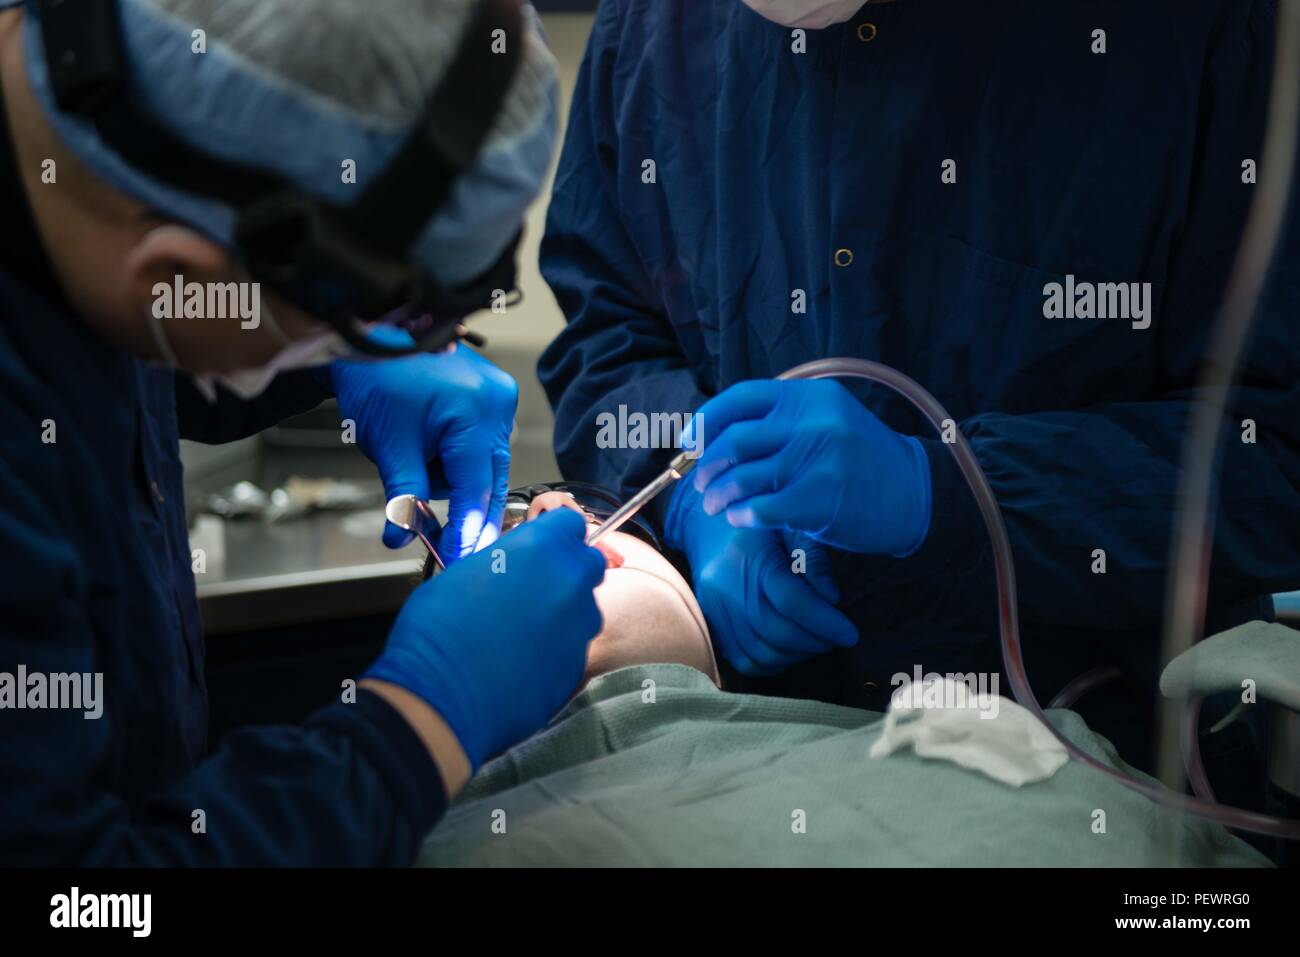 160209-N-MY174-033 PACIFIC OCEAN (Feb. 9, 2016) - Lt. Cmdr. Benjamin Lago, from Delitt, Mich., and Hospital Corpsman 1st Class Christopher Brown, from Portland, Ore., remove the wisdom teeth of Aviation Ordnanceman Airman Brian Deleon, from Jay, Okla., in USS John C. Stennis' (CVN 74) dental department. Providing a combat-ready force to protect collective maritime interests, Stennis is operating as part of the Great Green Fleet on a regularly scheduled Western Pacific deployment. (U.S. Navy photo by Mass Communication Specialist Seaman Tomas Compian / Released) Stock Photo